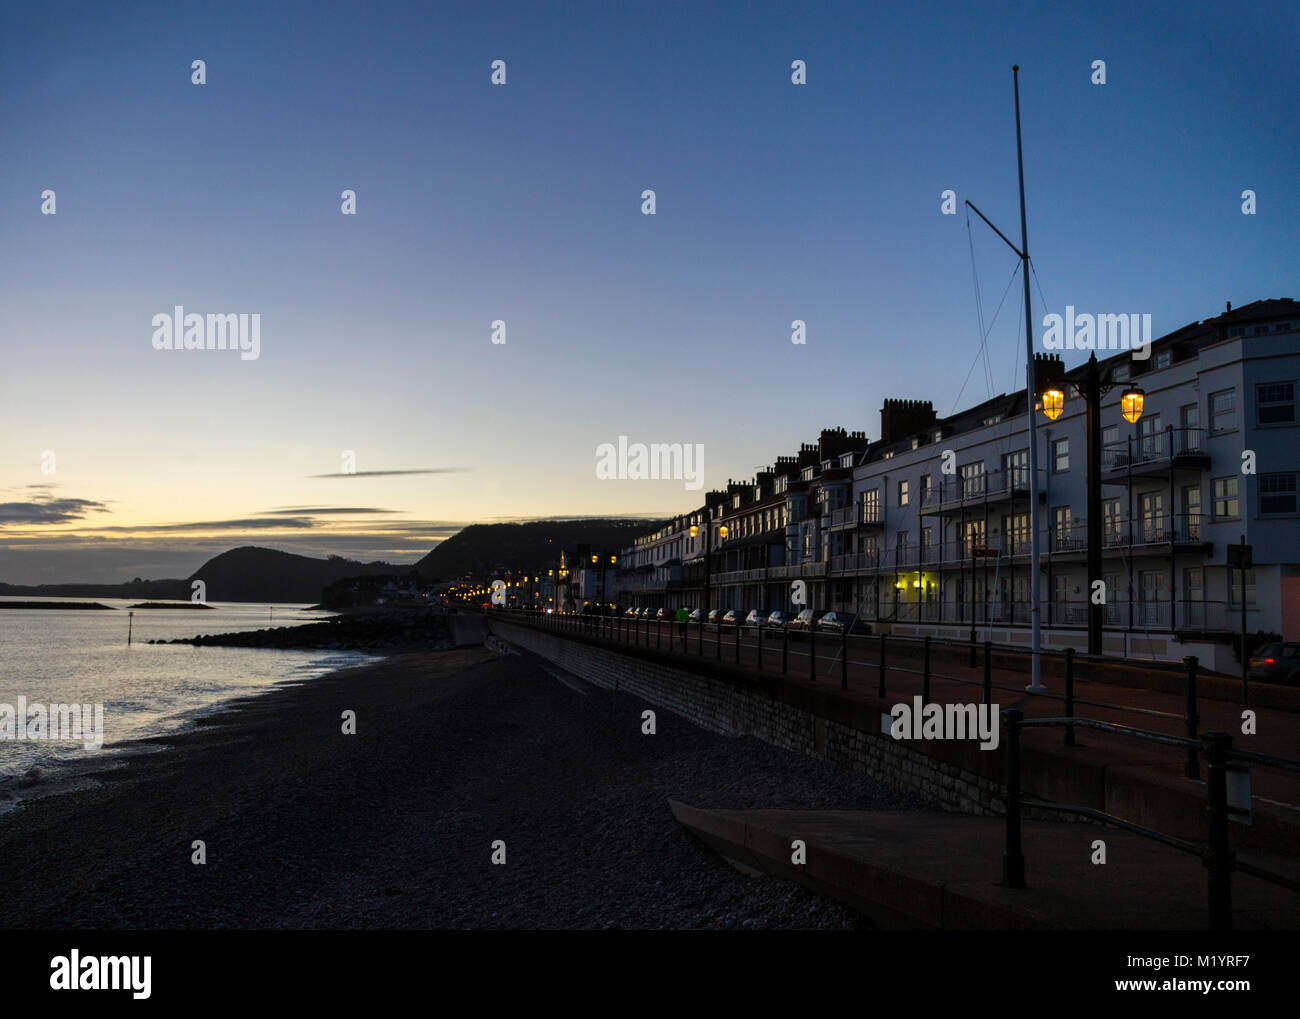 Night draws in on the seafront Esplanade at Sidmouth, Devon, England, UK. Stock Photo